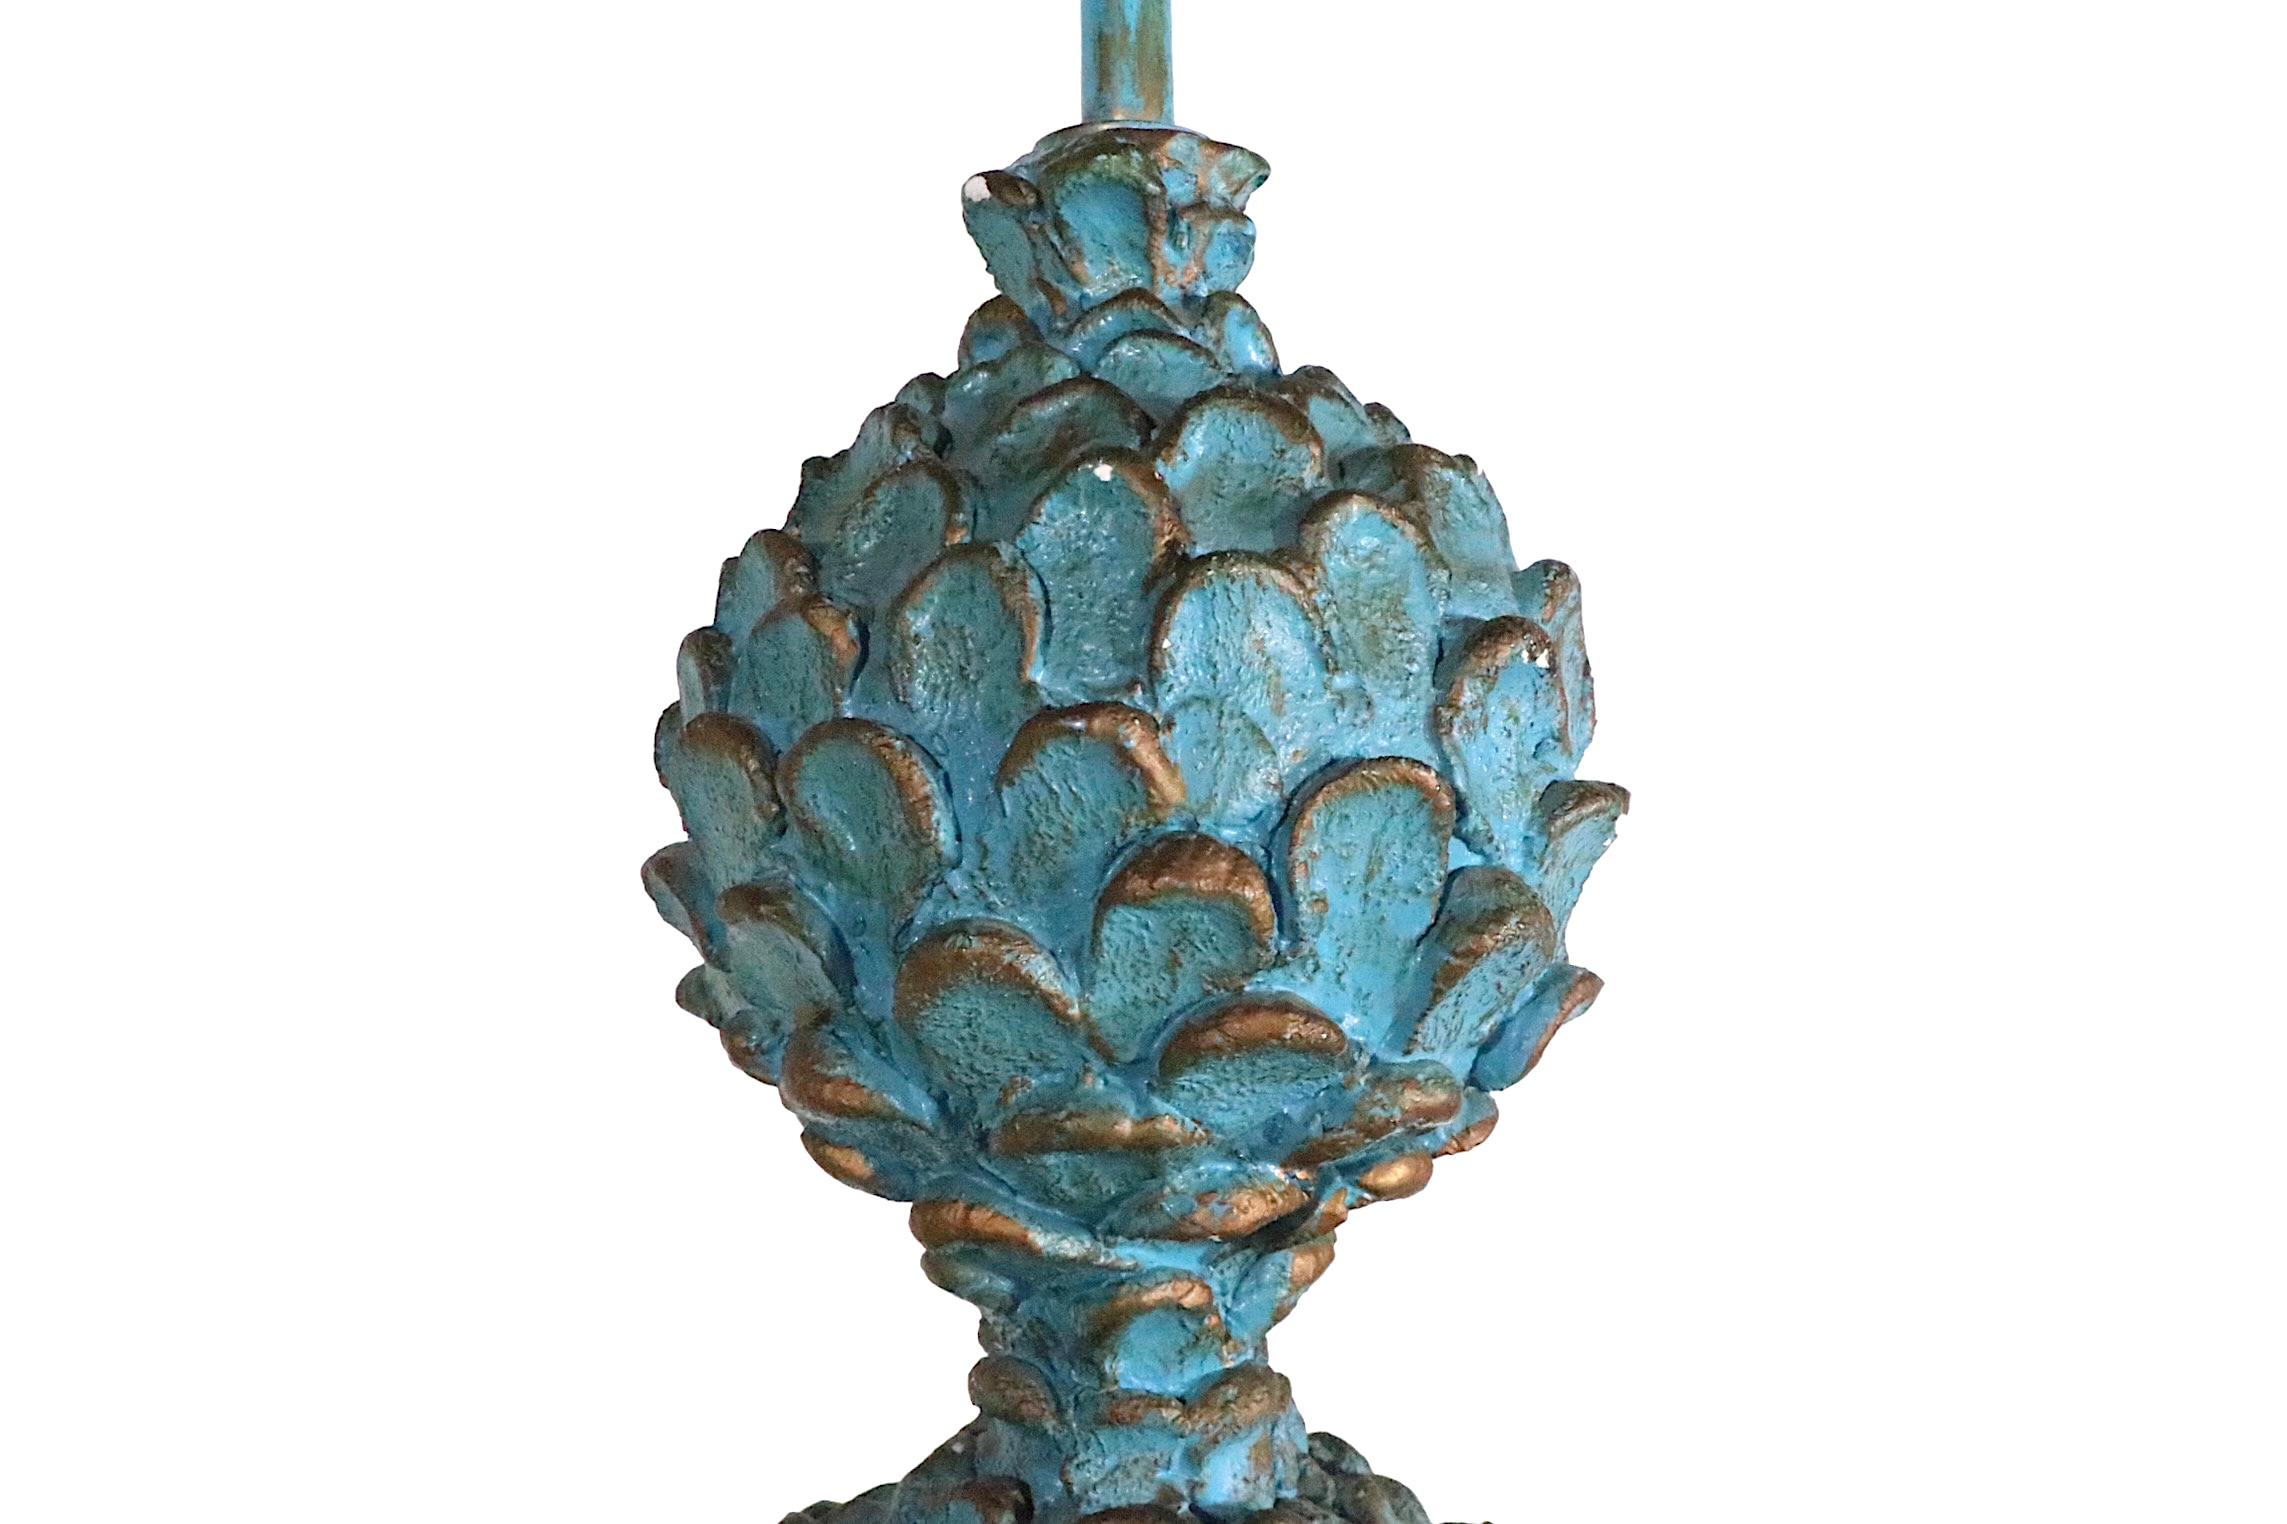 Decorative table lamp composed of painted plaster depicting a fantasy version of a potted  plant, in turquoise with gold highlights paint finish. Large, impressive scale, chic voguish style  Hollywood Regency style, table lamp circa 1970's.
The lamp